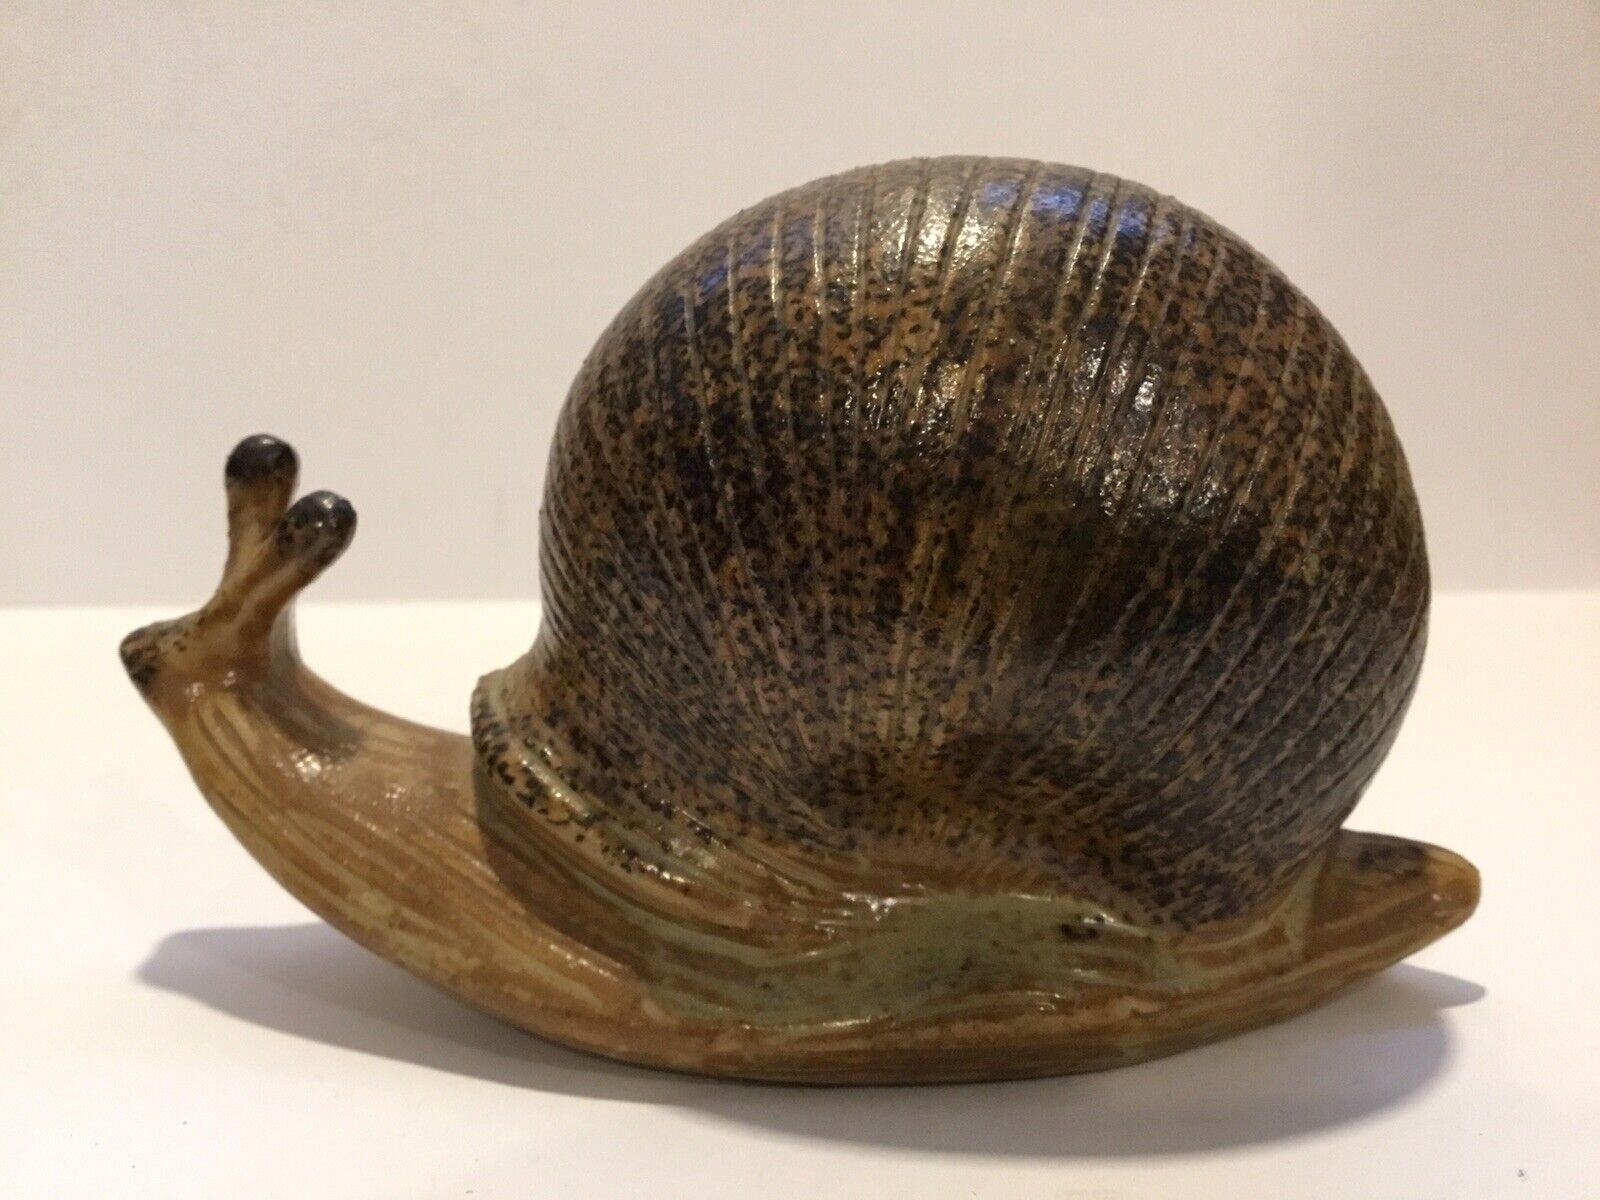 a Price Import Japan_Porcelain Snail_Great Details_Brown_3”x5.5”_Exc_SHIPS FREE